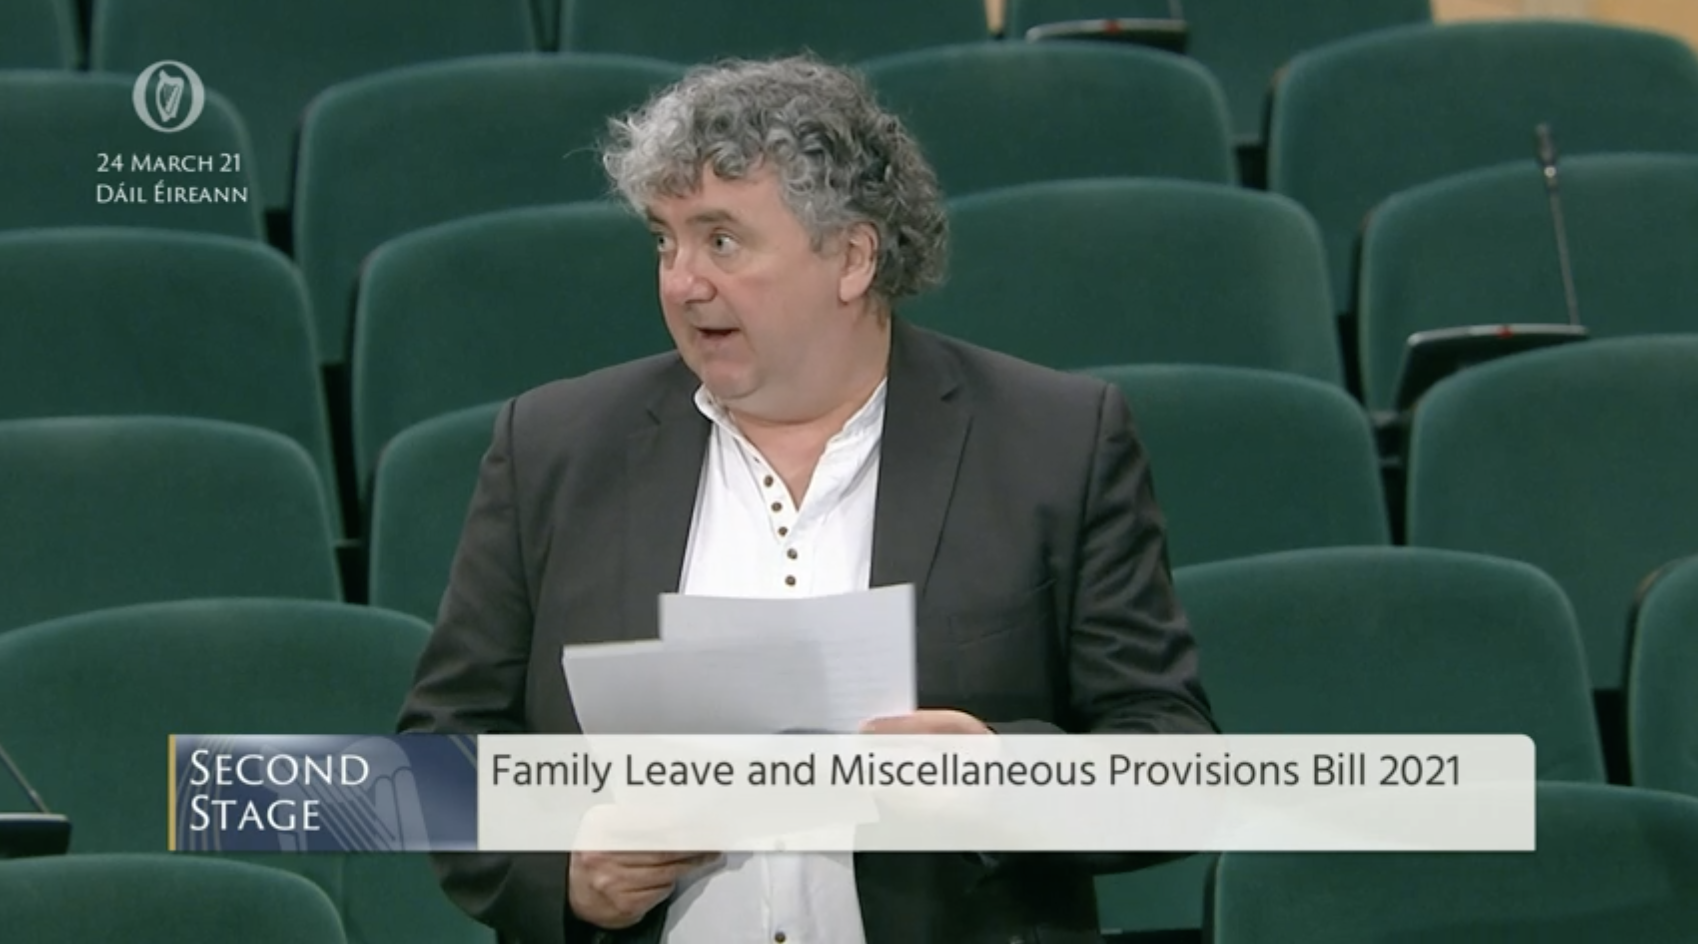 Pringle says changes to family leave provisions are belated but welcome